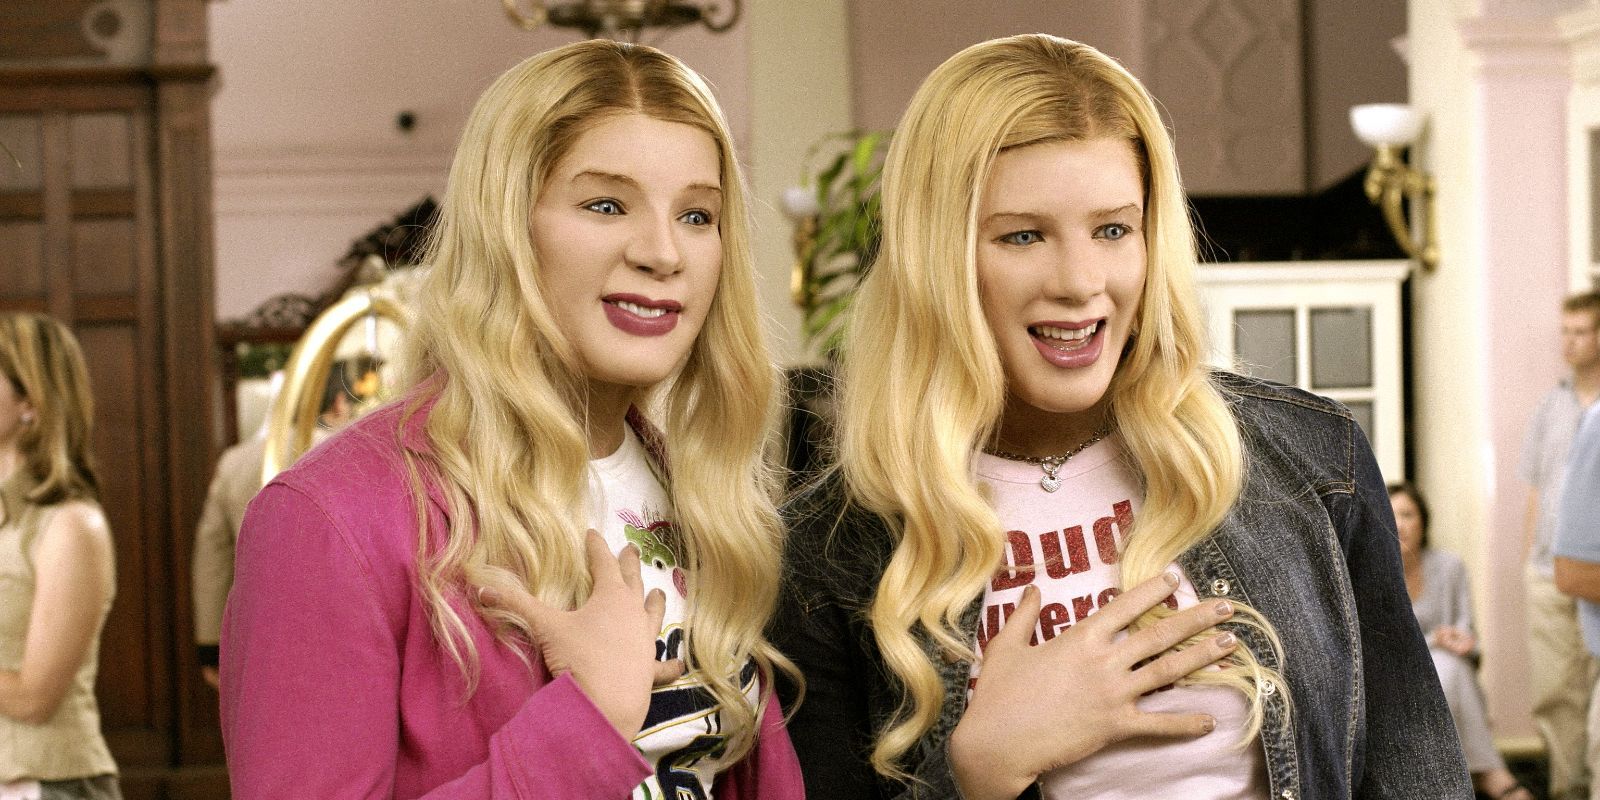 Marcus and Kevin Dressed as White Women in the movie, White Chicks